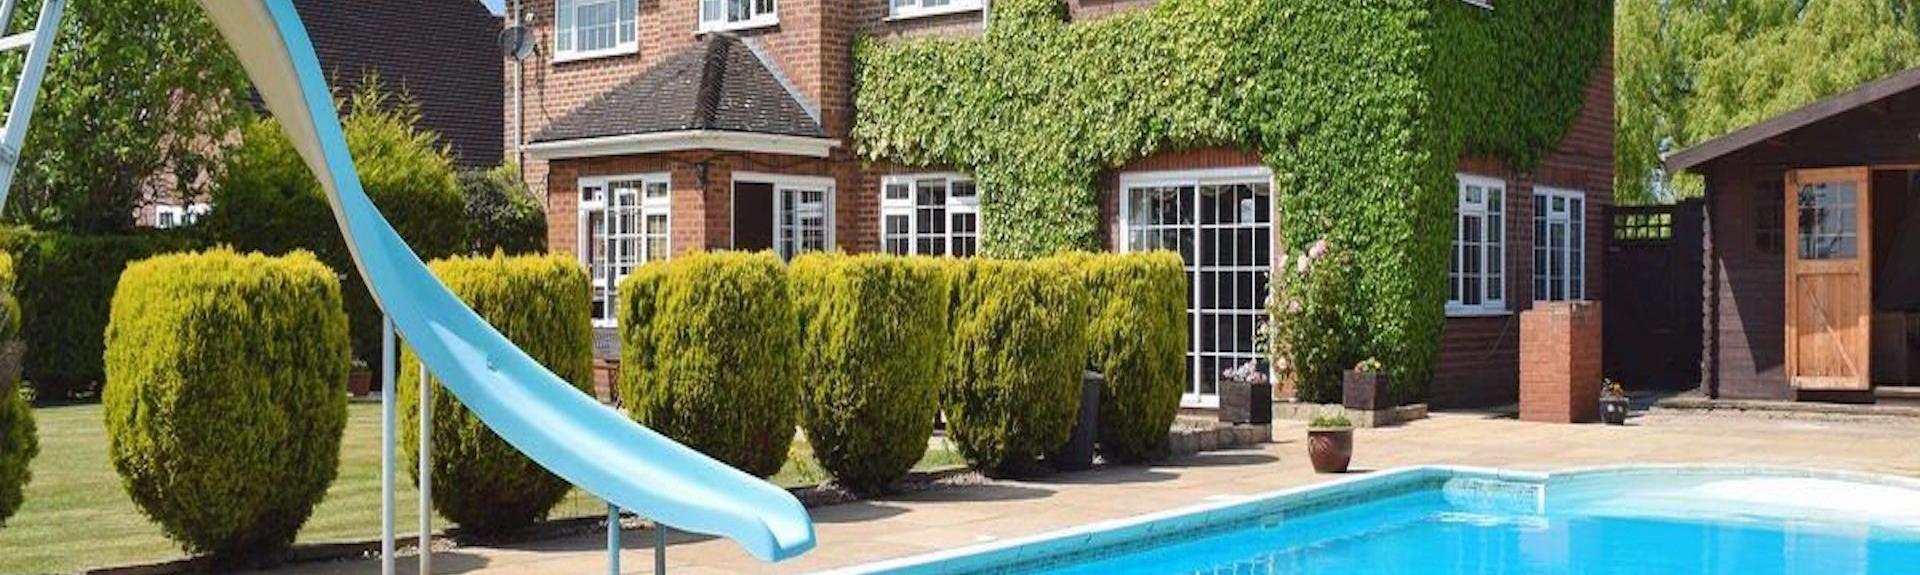 A Warwickshire holiday cottage outdoor pool with a slide.